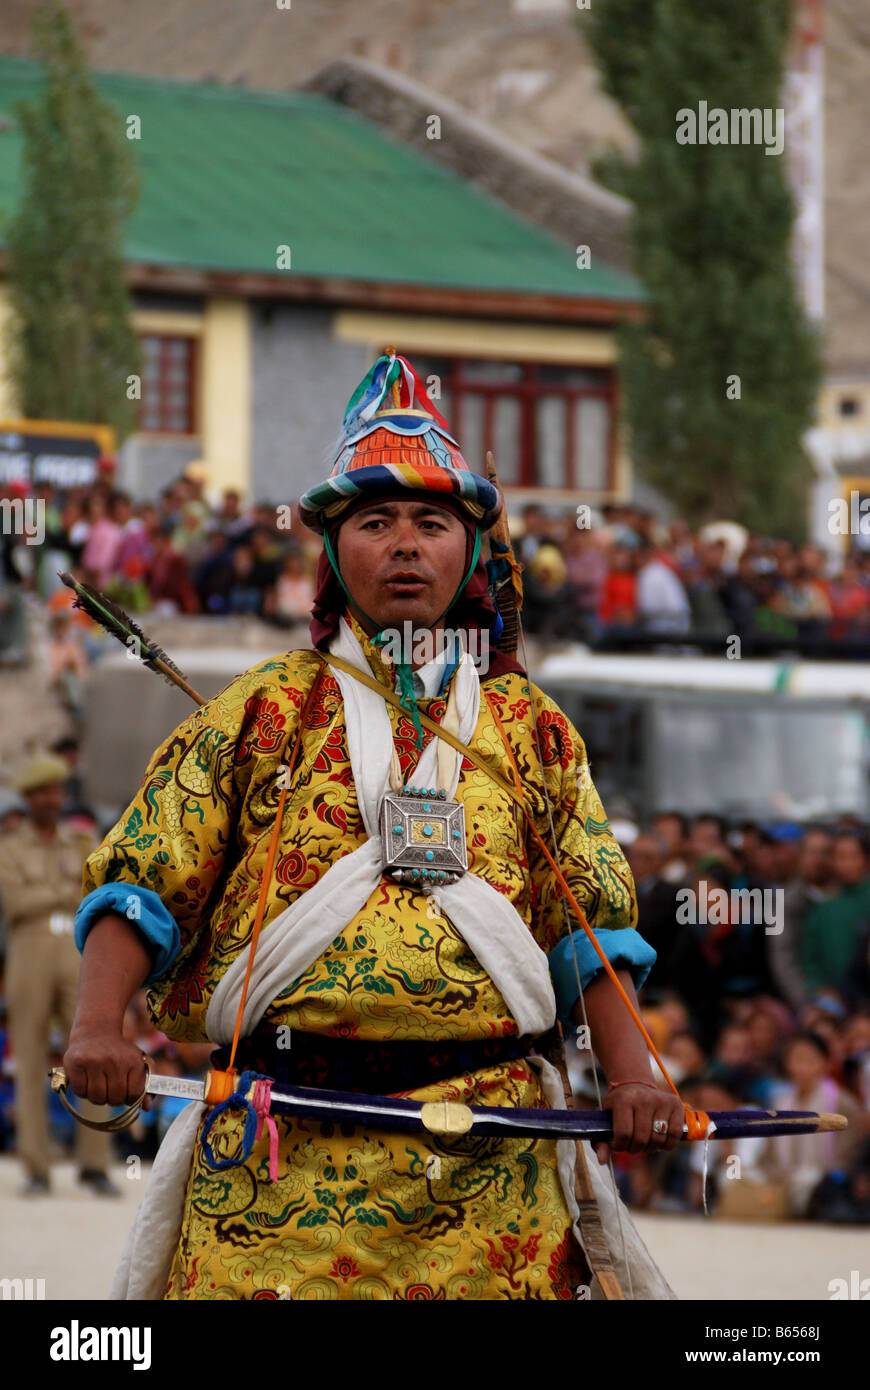 A ladakhi man wearing Traditional Clothes in Ladakh festival Stock Photo